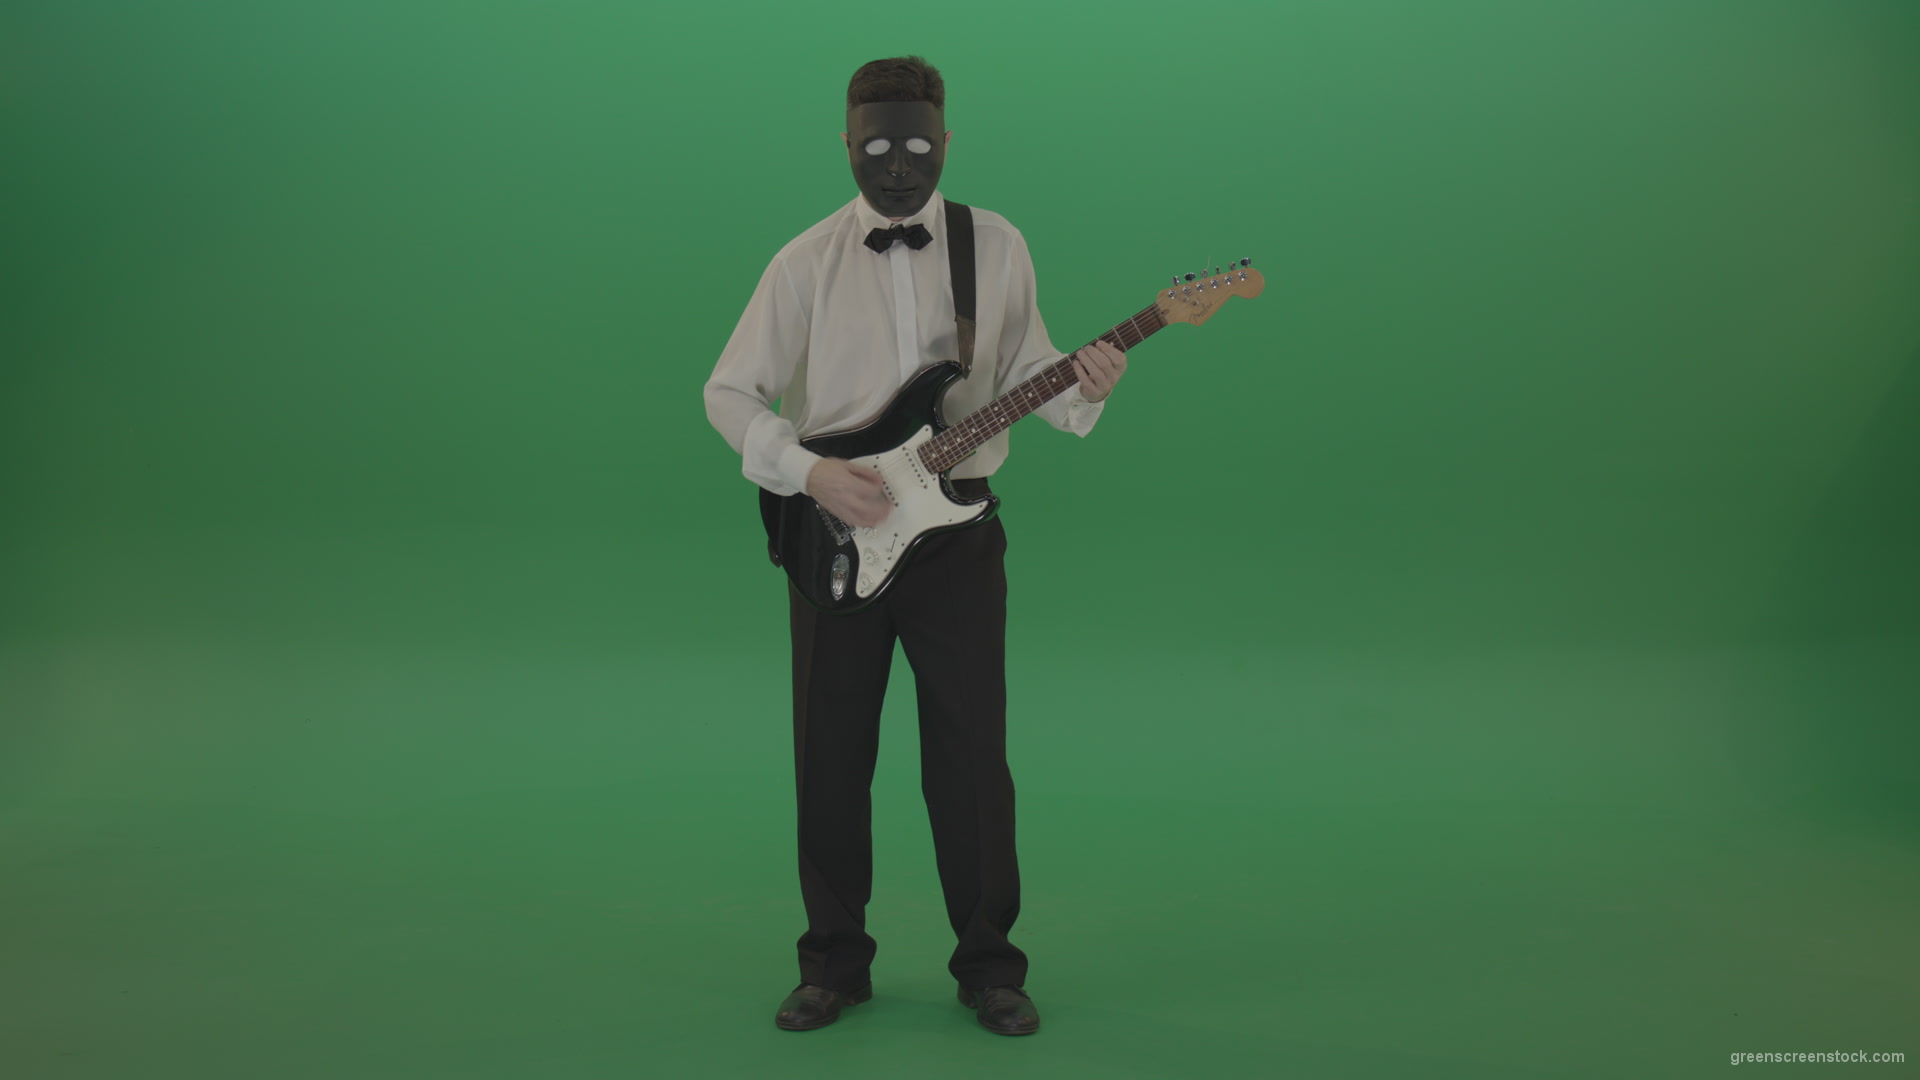 Classic-guitarist-in-white-shirt-play-guitar-in-mask-isolated-on-green-screen_004 Green Screen Stock